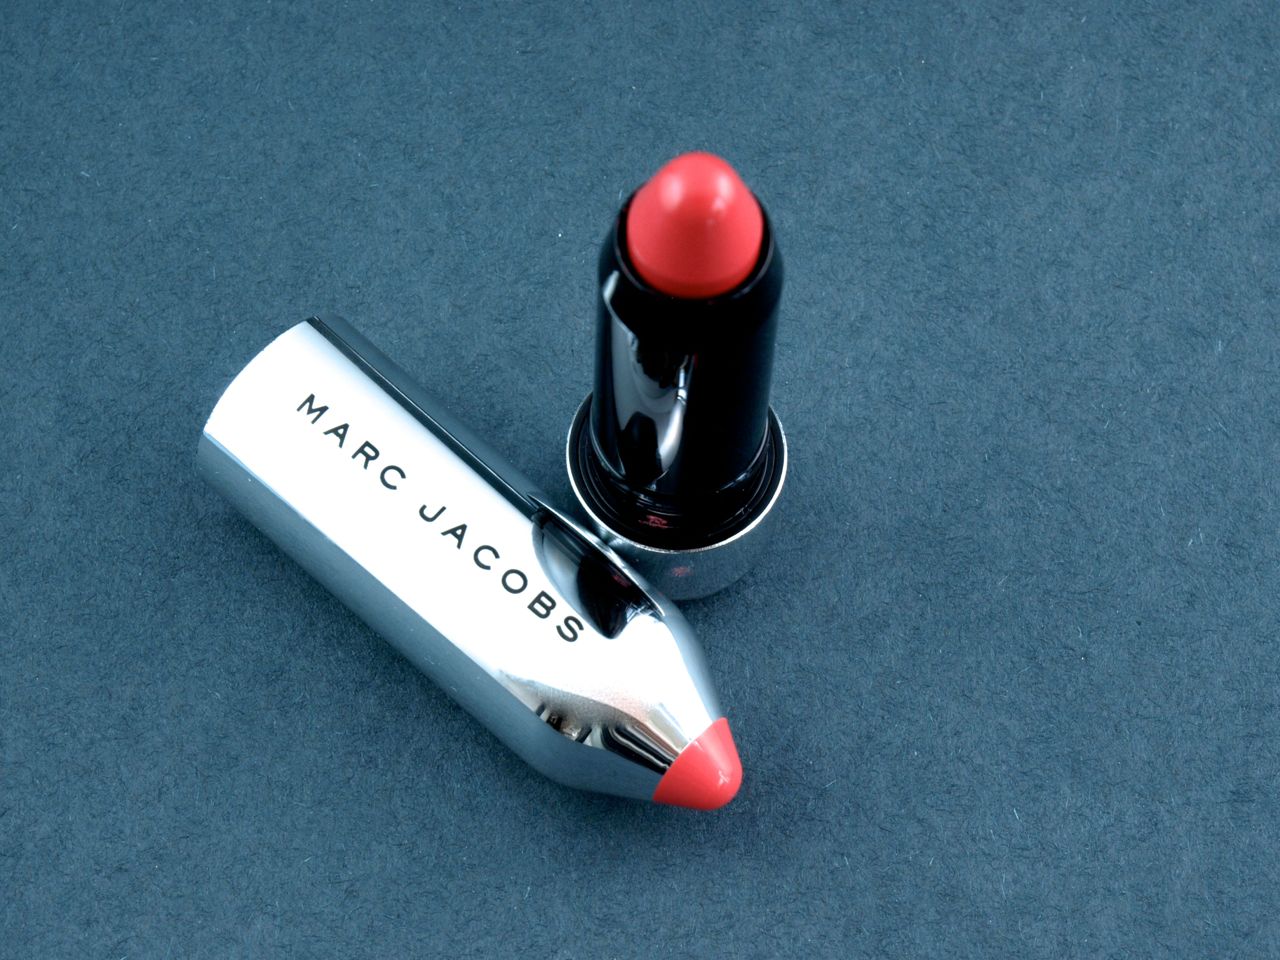 Marc Jacobs Kiss Pop Lip Color Stick in "Heartbreaker": Review and Swatches